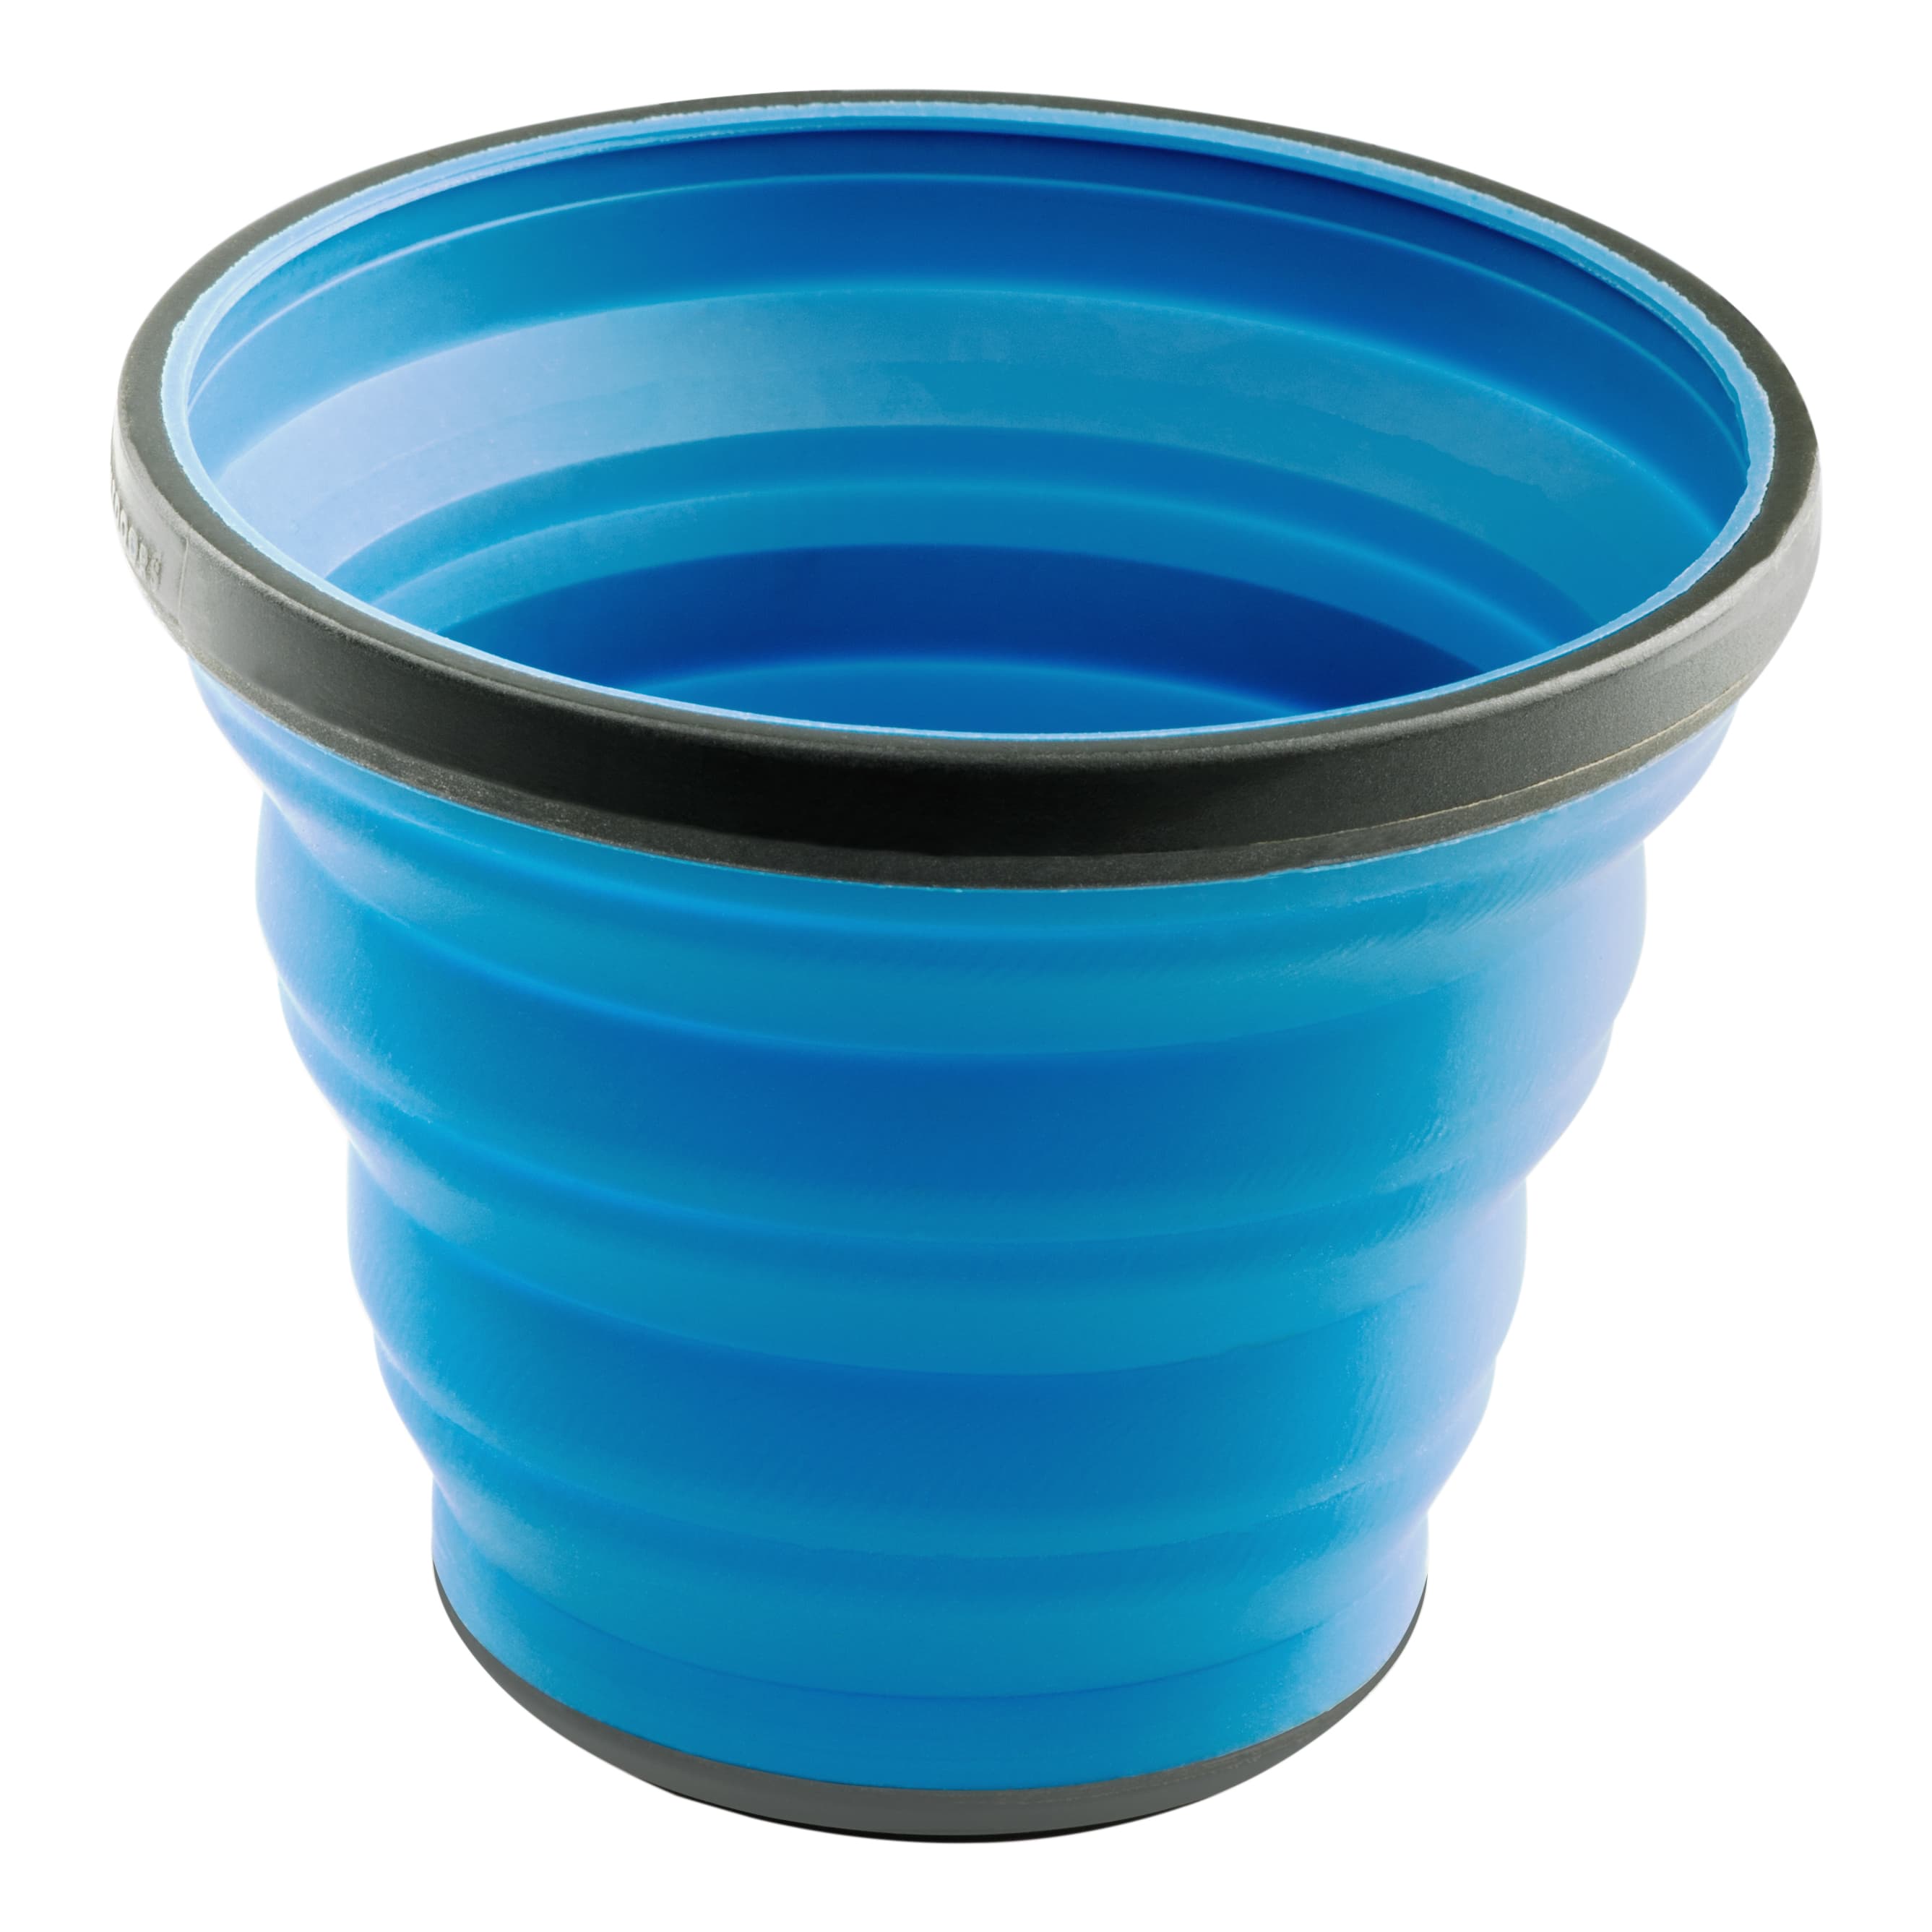 GSI Outdoors Escape Collapsible Cup - Blue